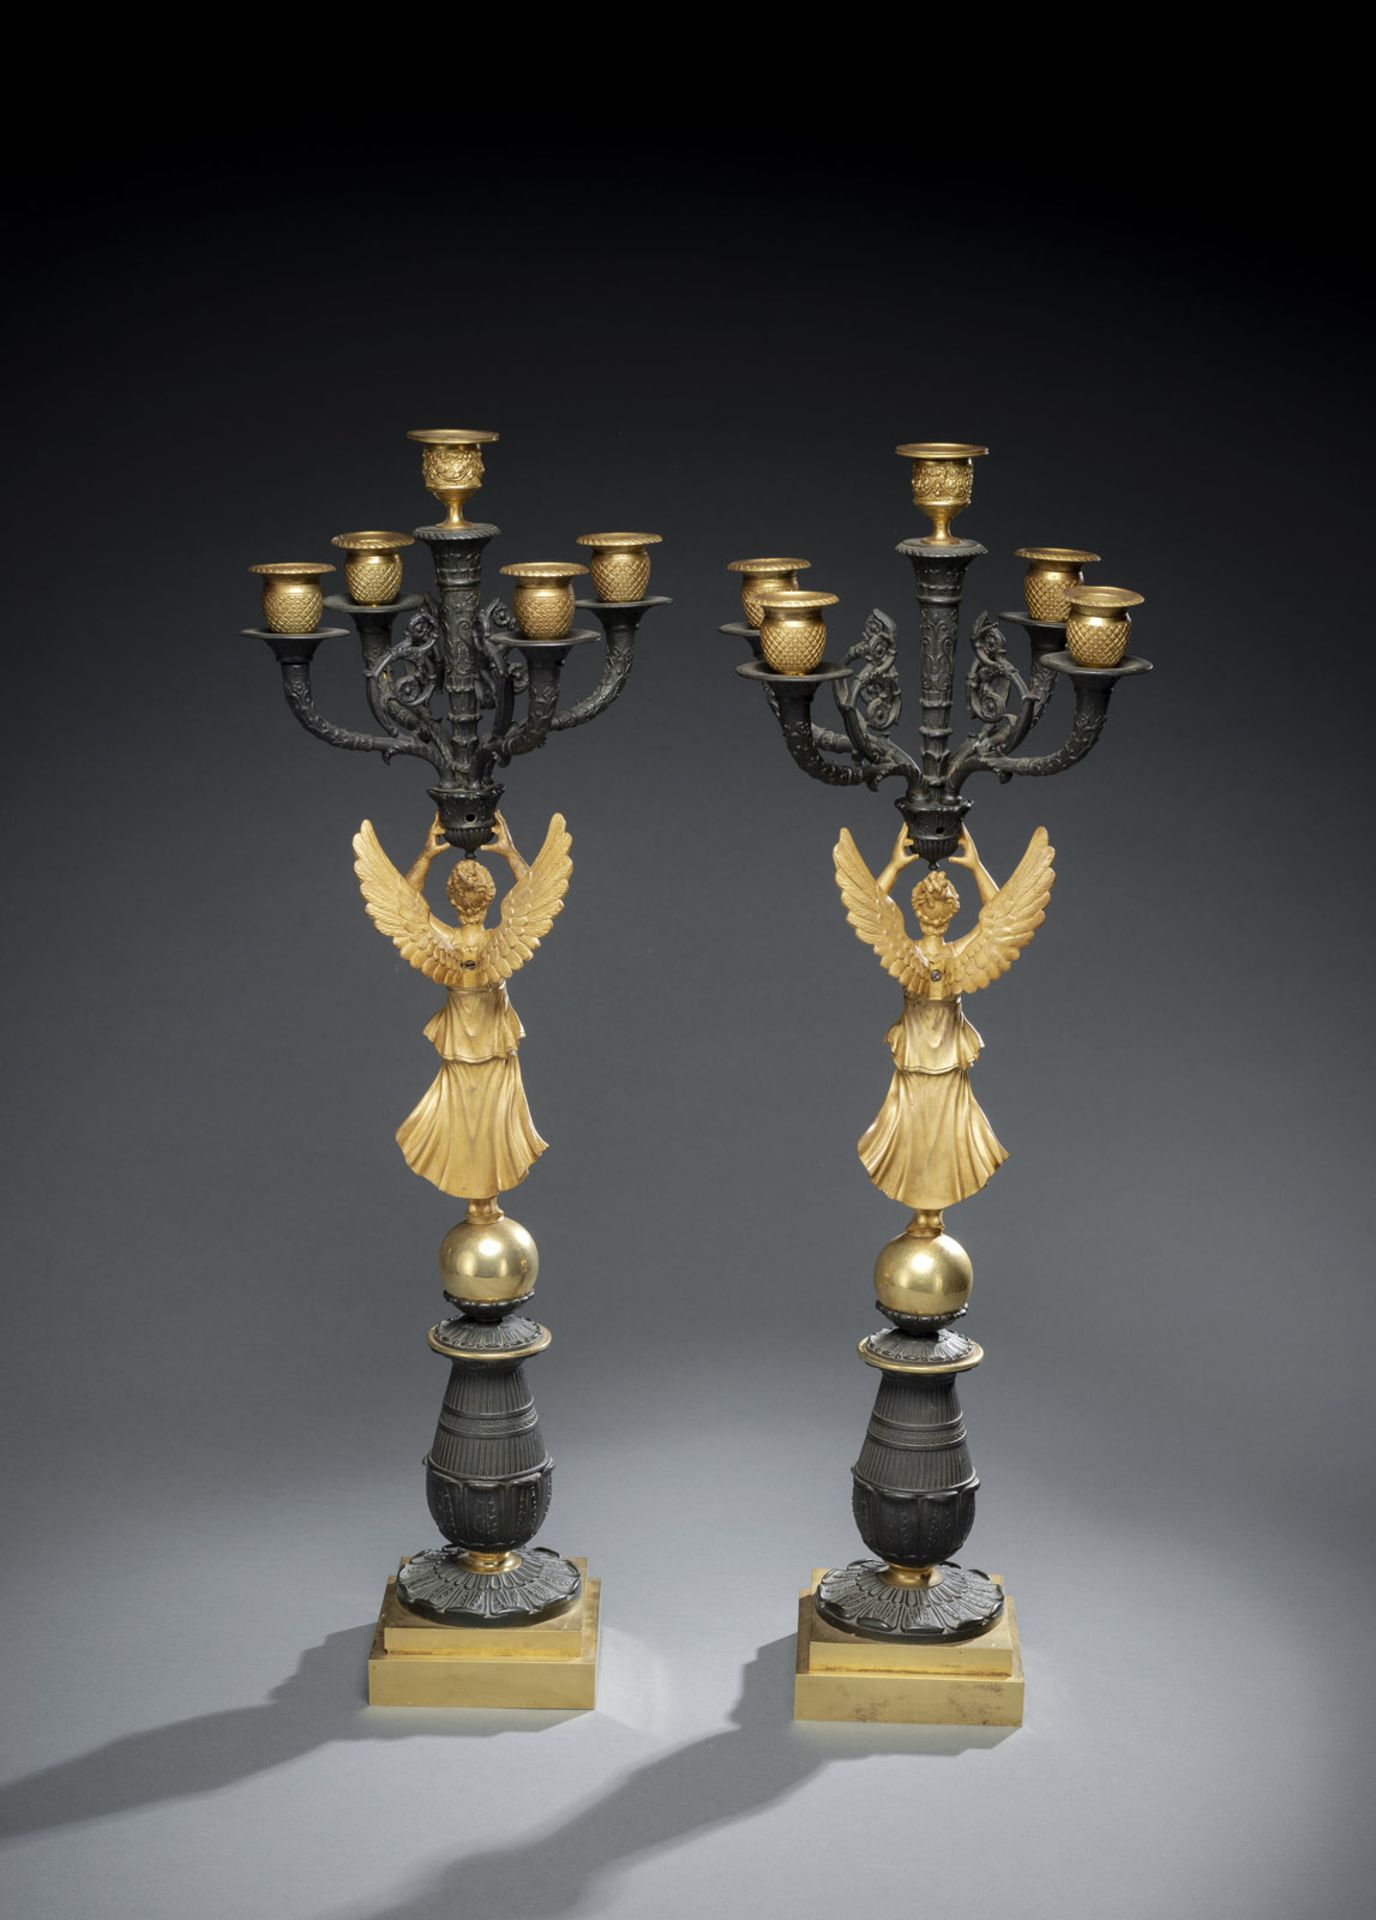 A PAIR OF FRENCH CHARLES X ORMOLU AND PAINTED BRONZE FIVE LIGHT CANDELABRA - Image 3 of 3